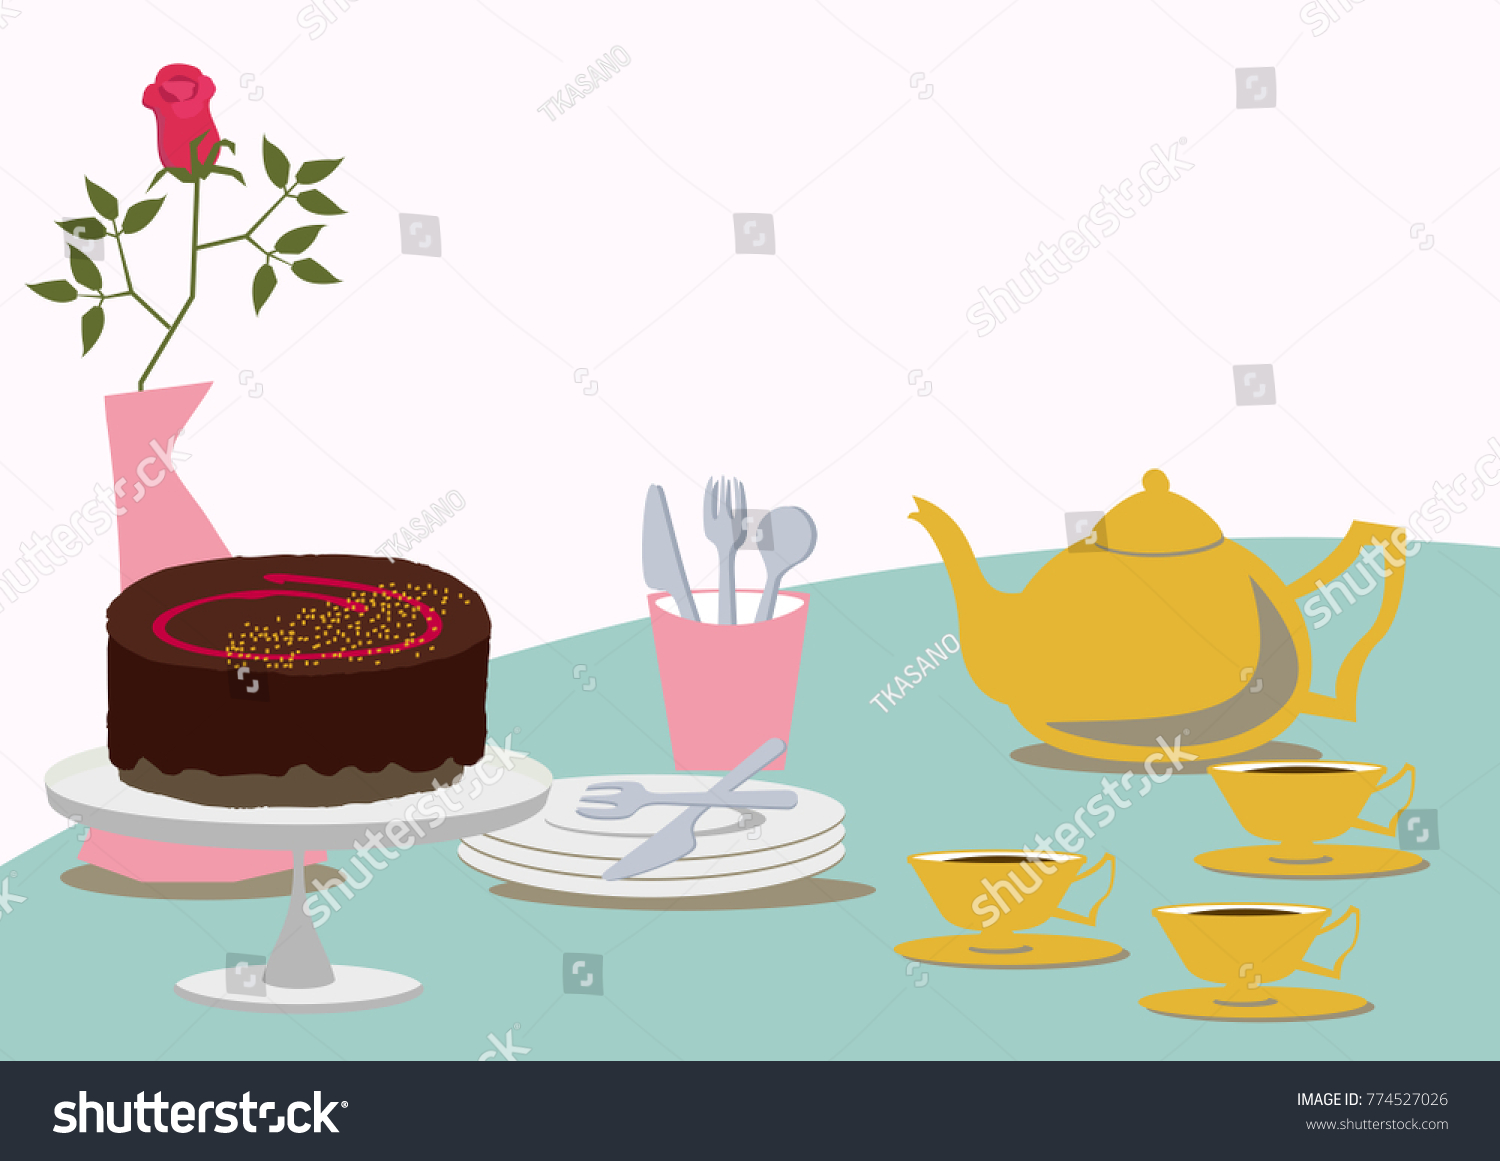 Image of Valentine's Day. Chocolate cake. Image of tea time.
Tea time table set. #774527026